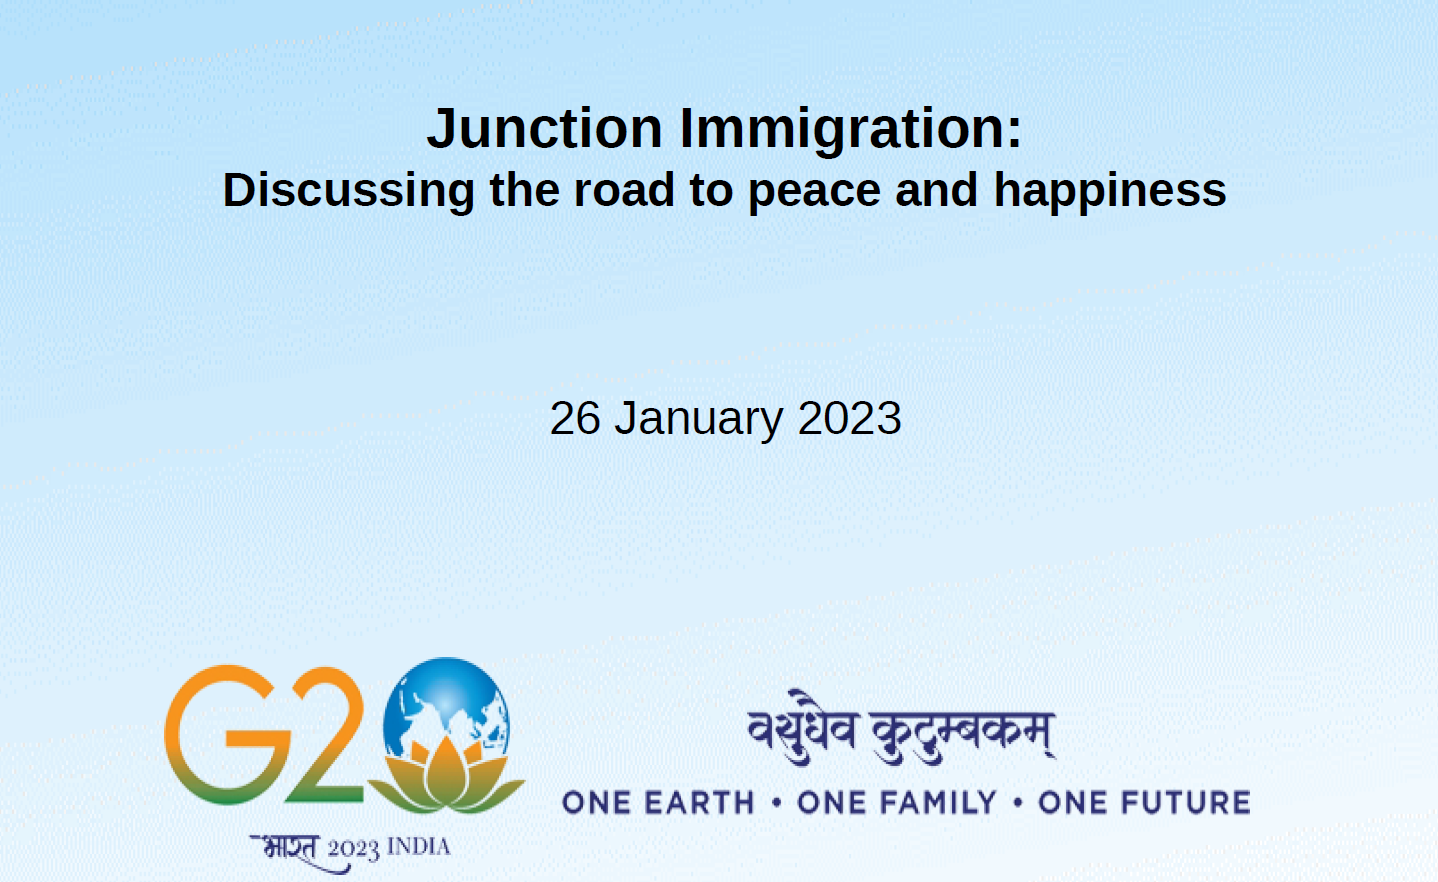 Junction Immigration: Discussing the Road to Peace and Happiness